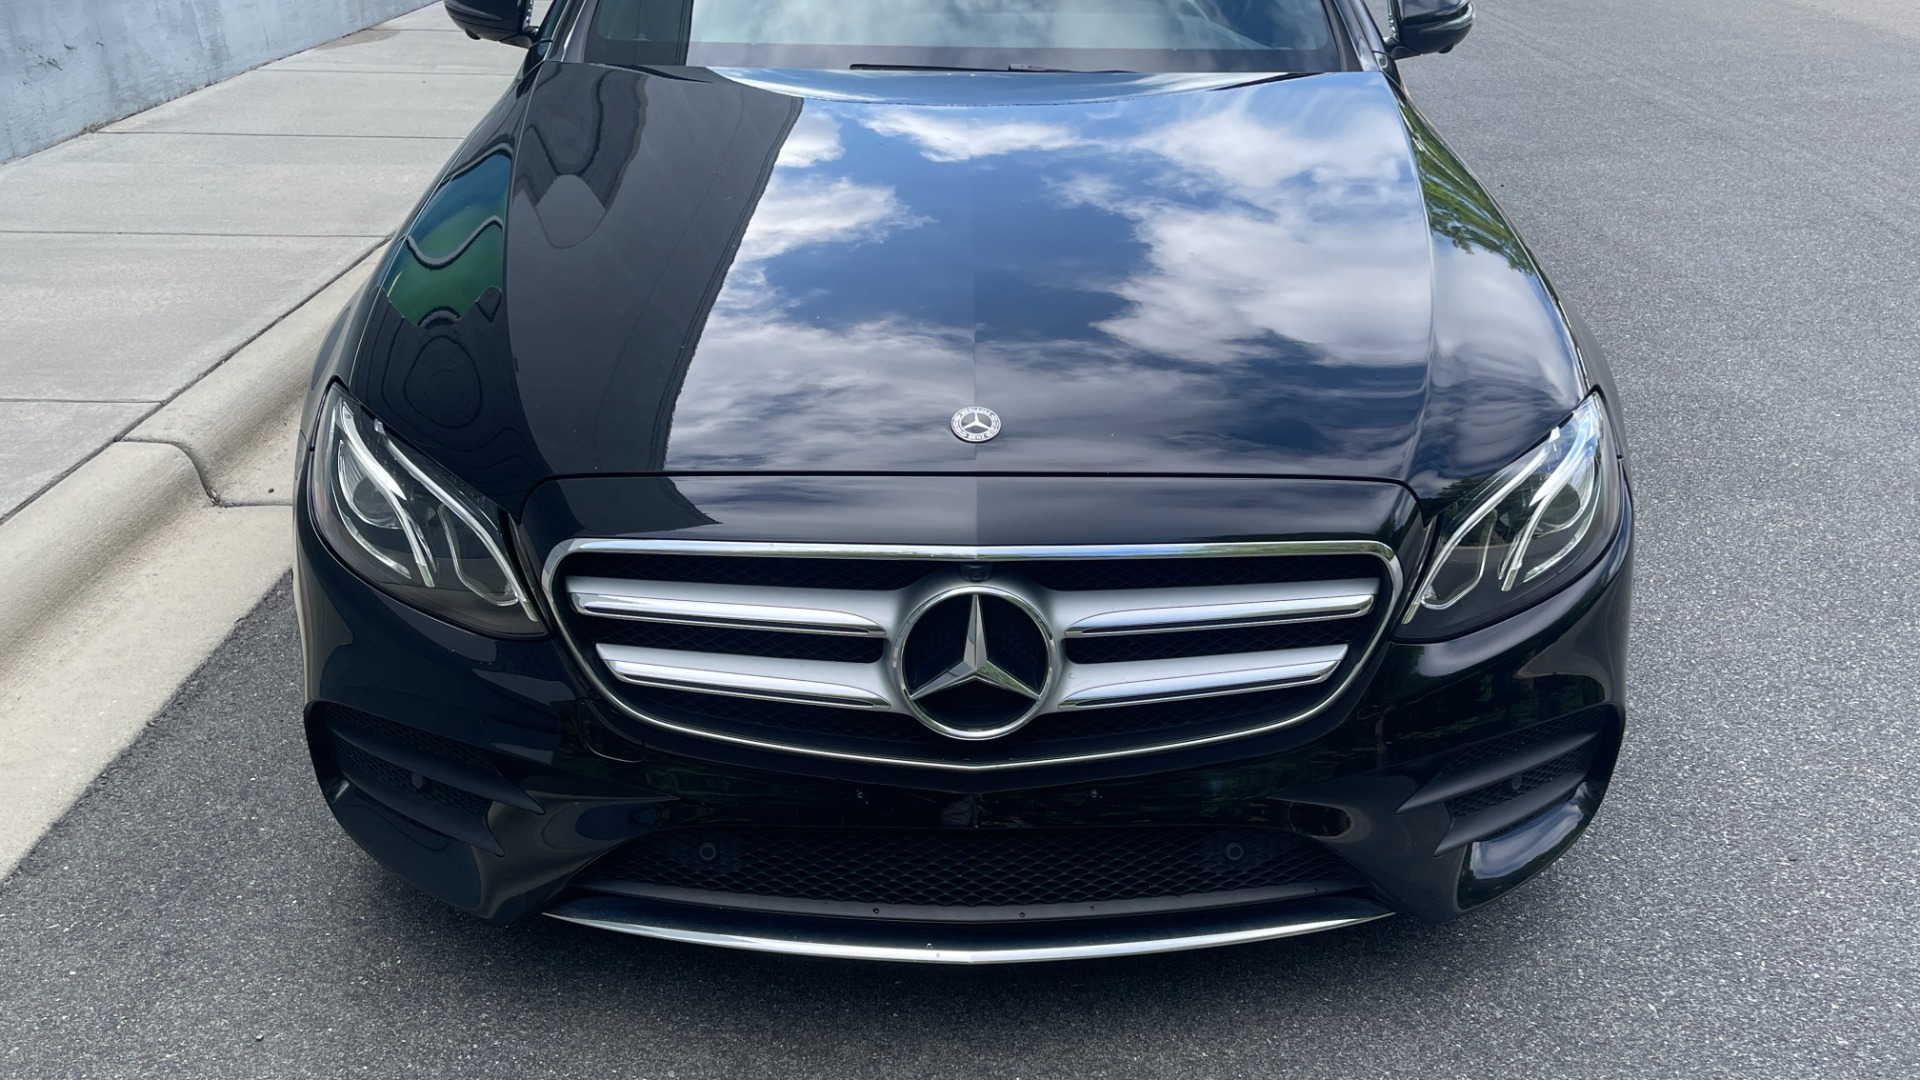 Used 2020 Mercedes-Benz E-Class E 350 / 4MATIC / AMG LINE / BURMESTER SOUND / PANORAMIC ROOF for sale $52,999 at Formula Imports in Charlotte NC 28227 24